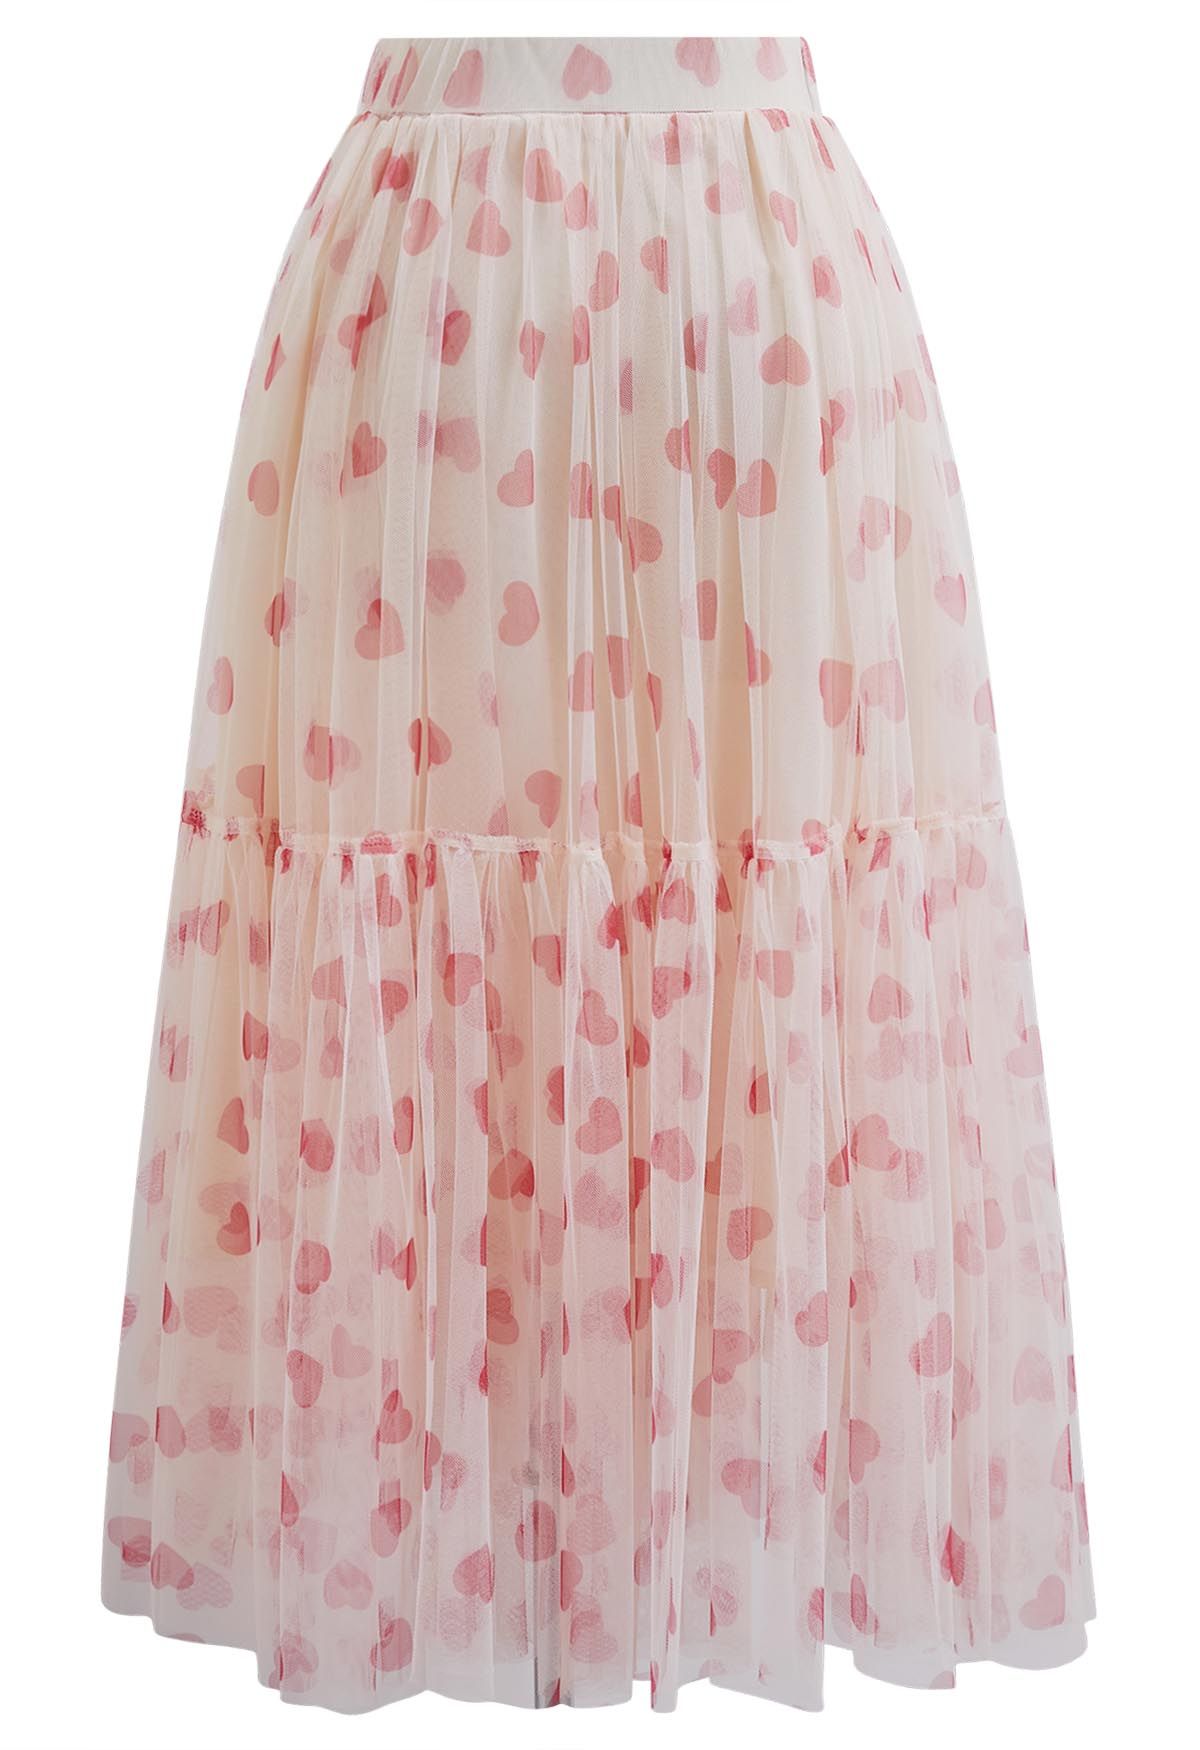 Can't Let Go Mesh Tulle Midi Skirt in Pink Heart - Retro, Indie and ...